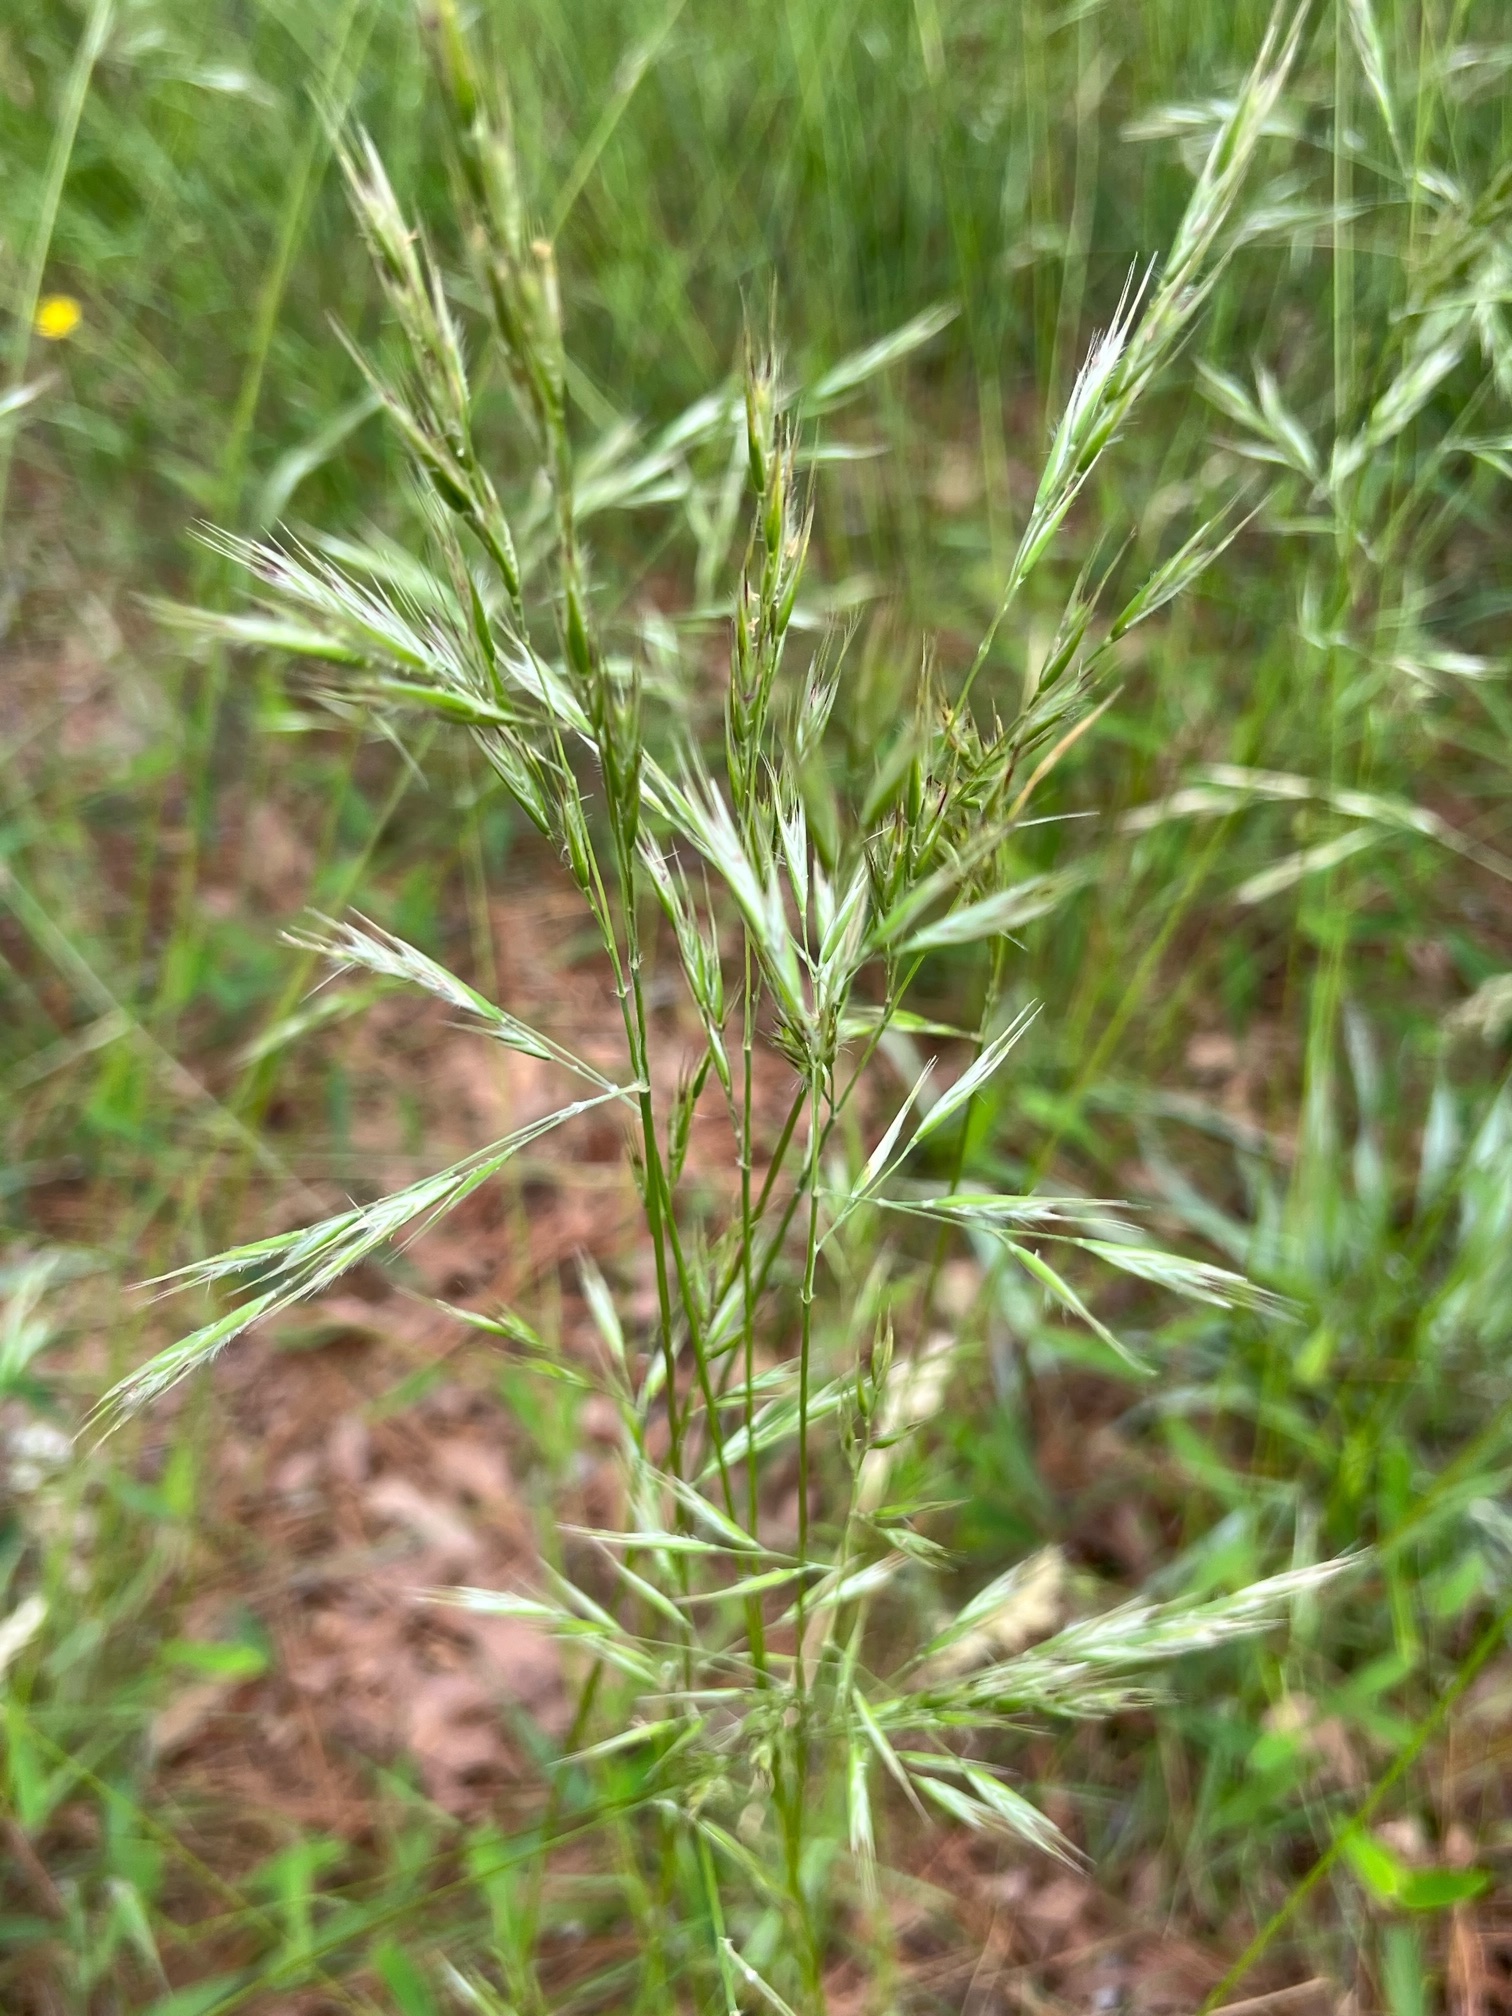 The Scientific Name is Danthonia sericea. You will likely hear them called Silky Oat-grass, Downy Danthonia. This picture shows the Spikelets are in terminal panicles and have conspicuous awns. of Danthonia sericea